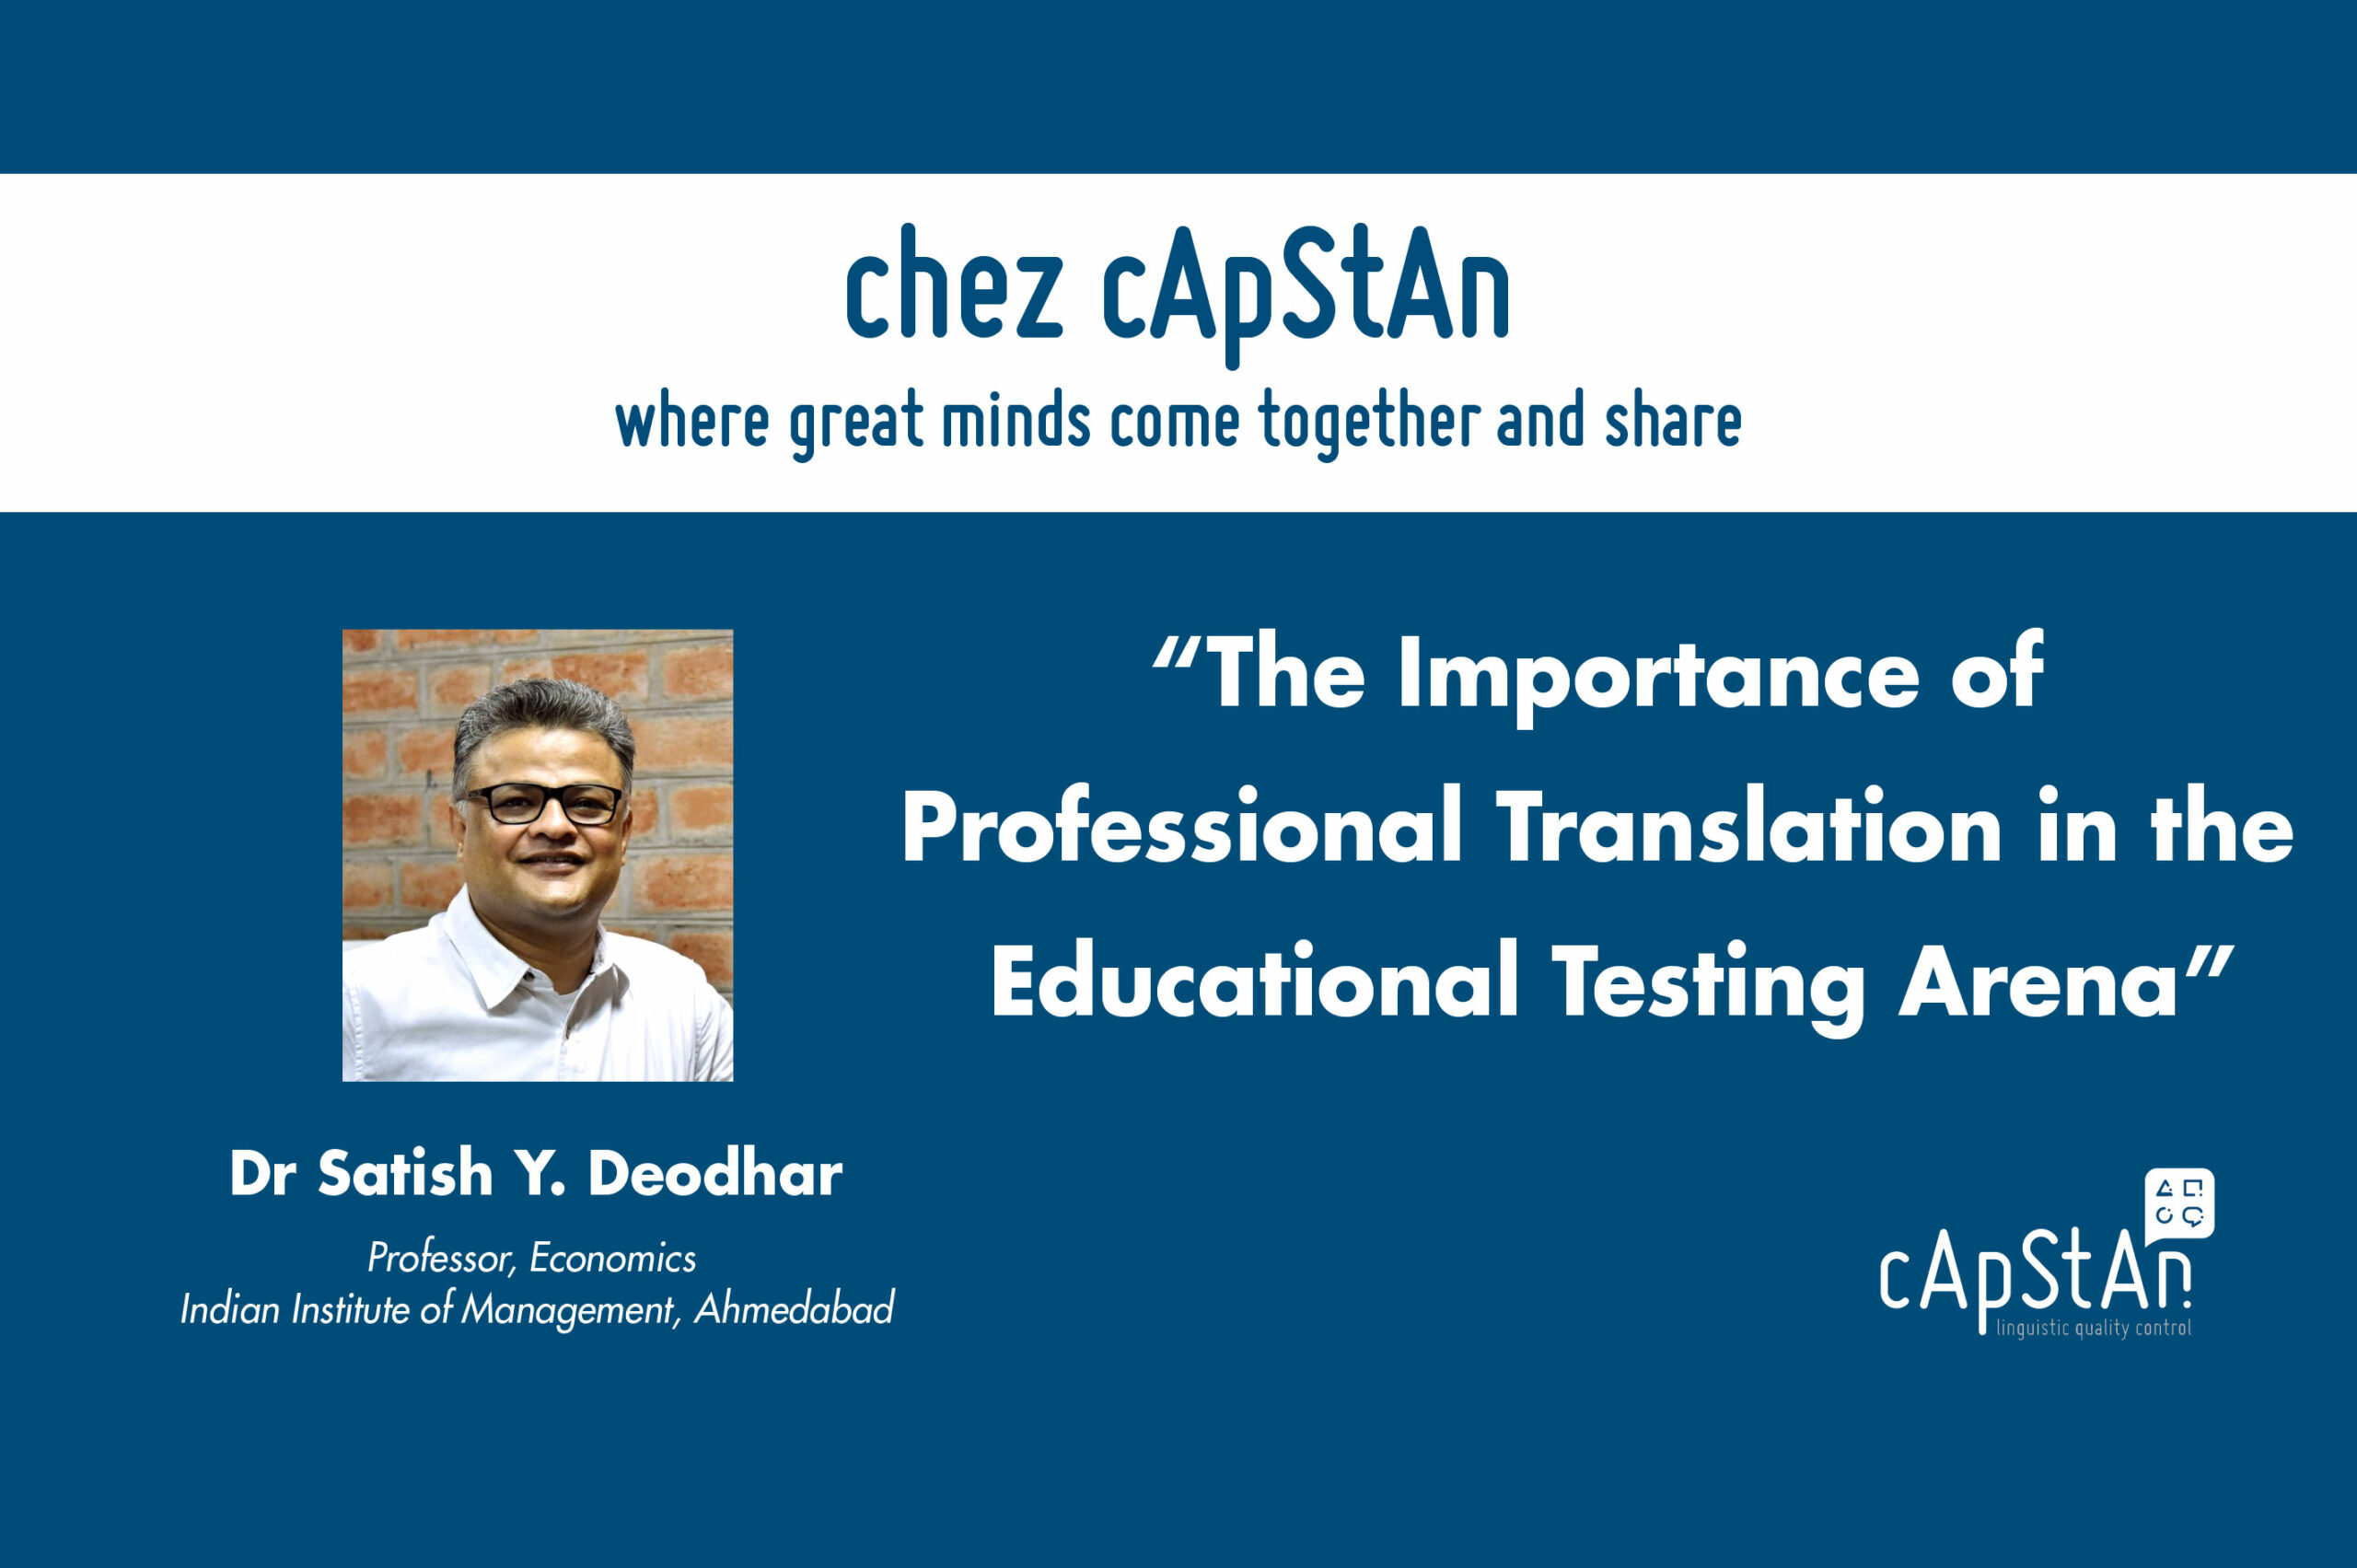 Dr. Satish Deodhar, The Importance of Professional Translation in the Educational Testing Arena